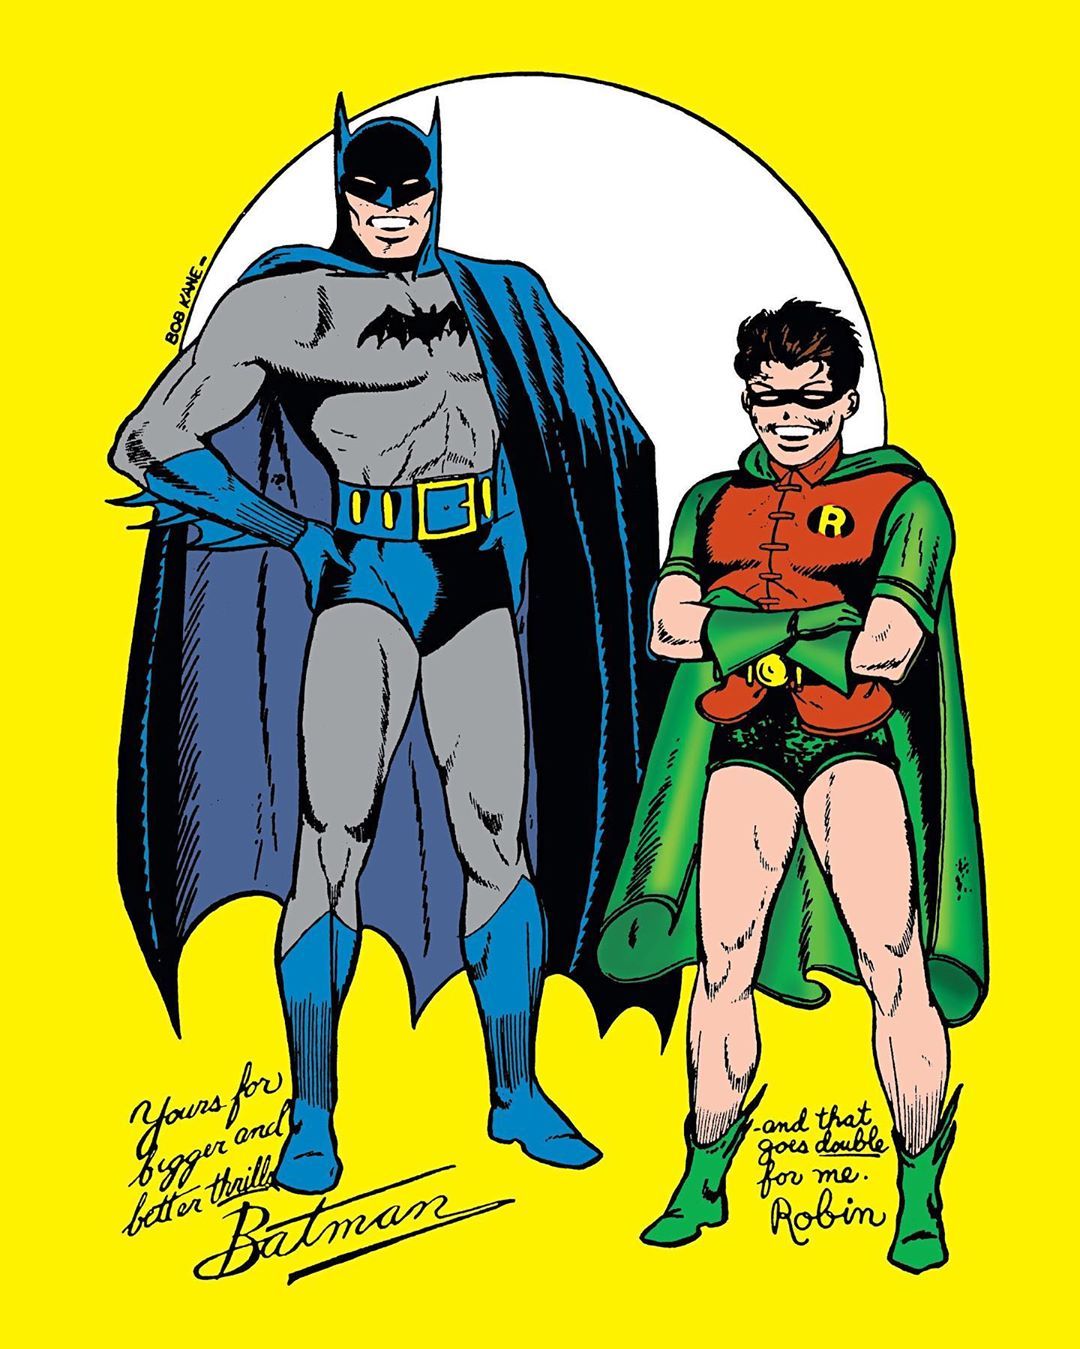 Which Comic Book Superhero Was Sued Over Its Similarity to Batman?